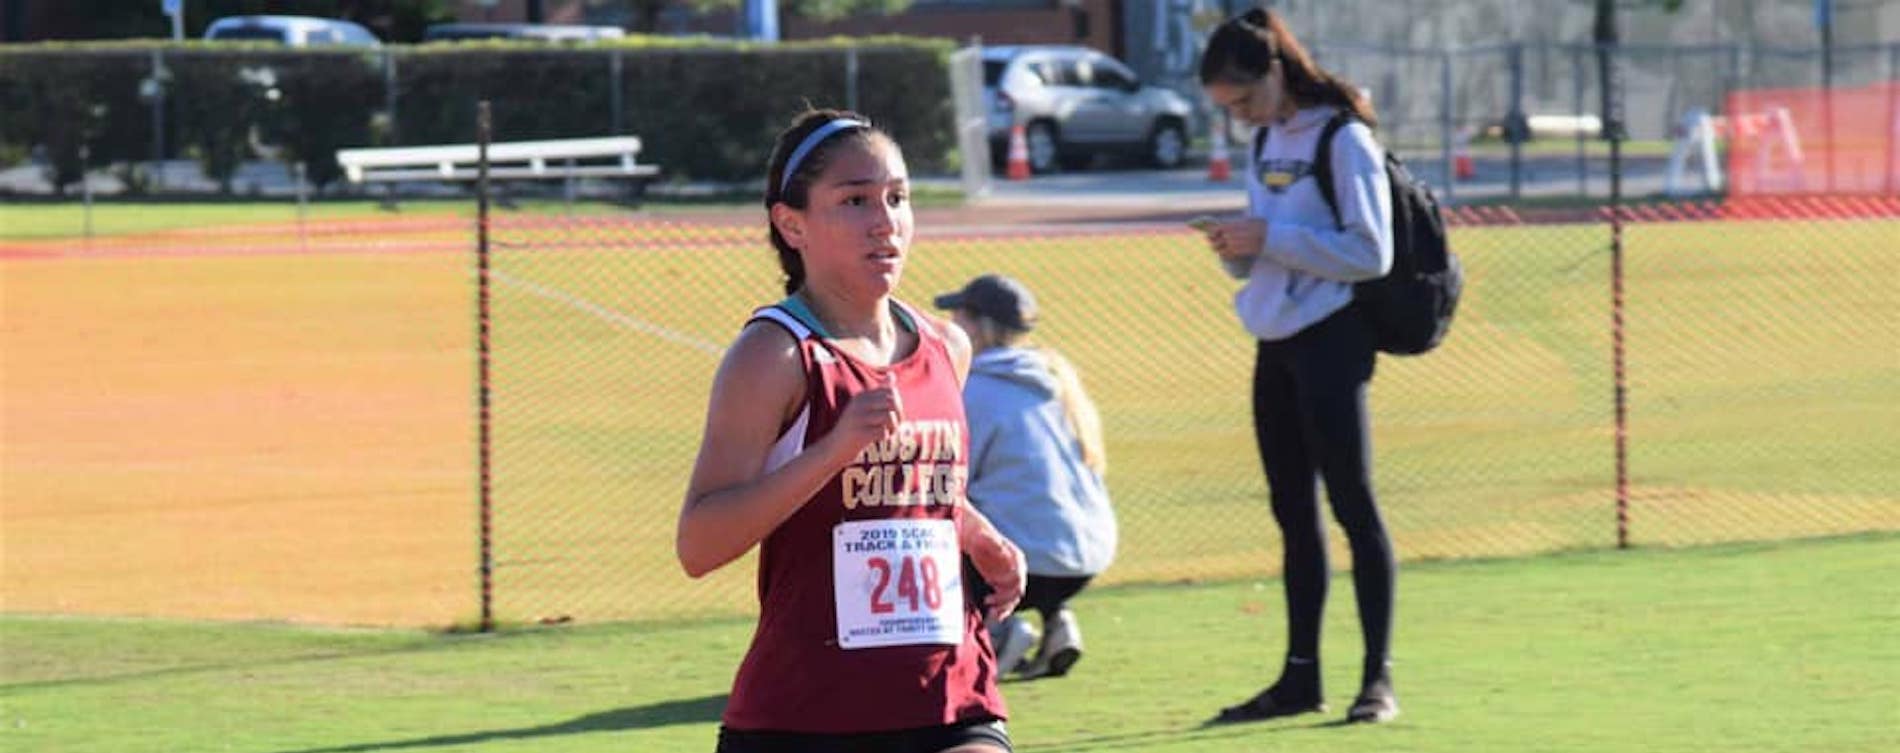 'Roos Run Well at SCAC Championships